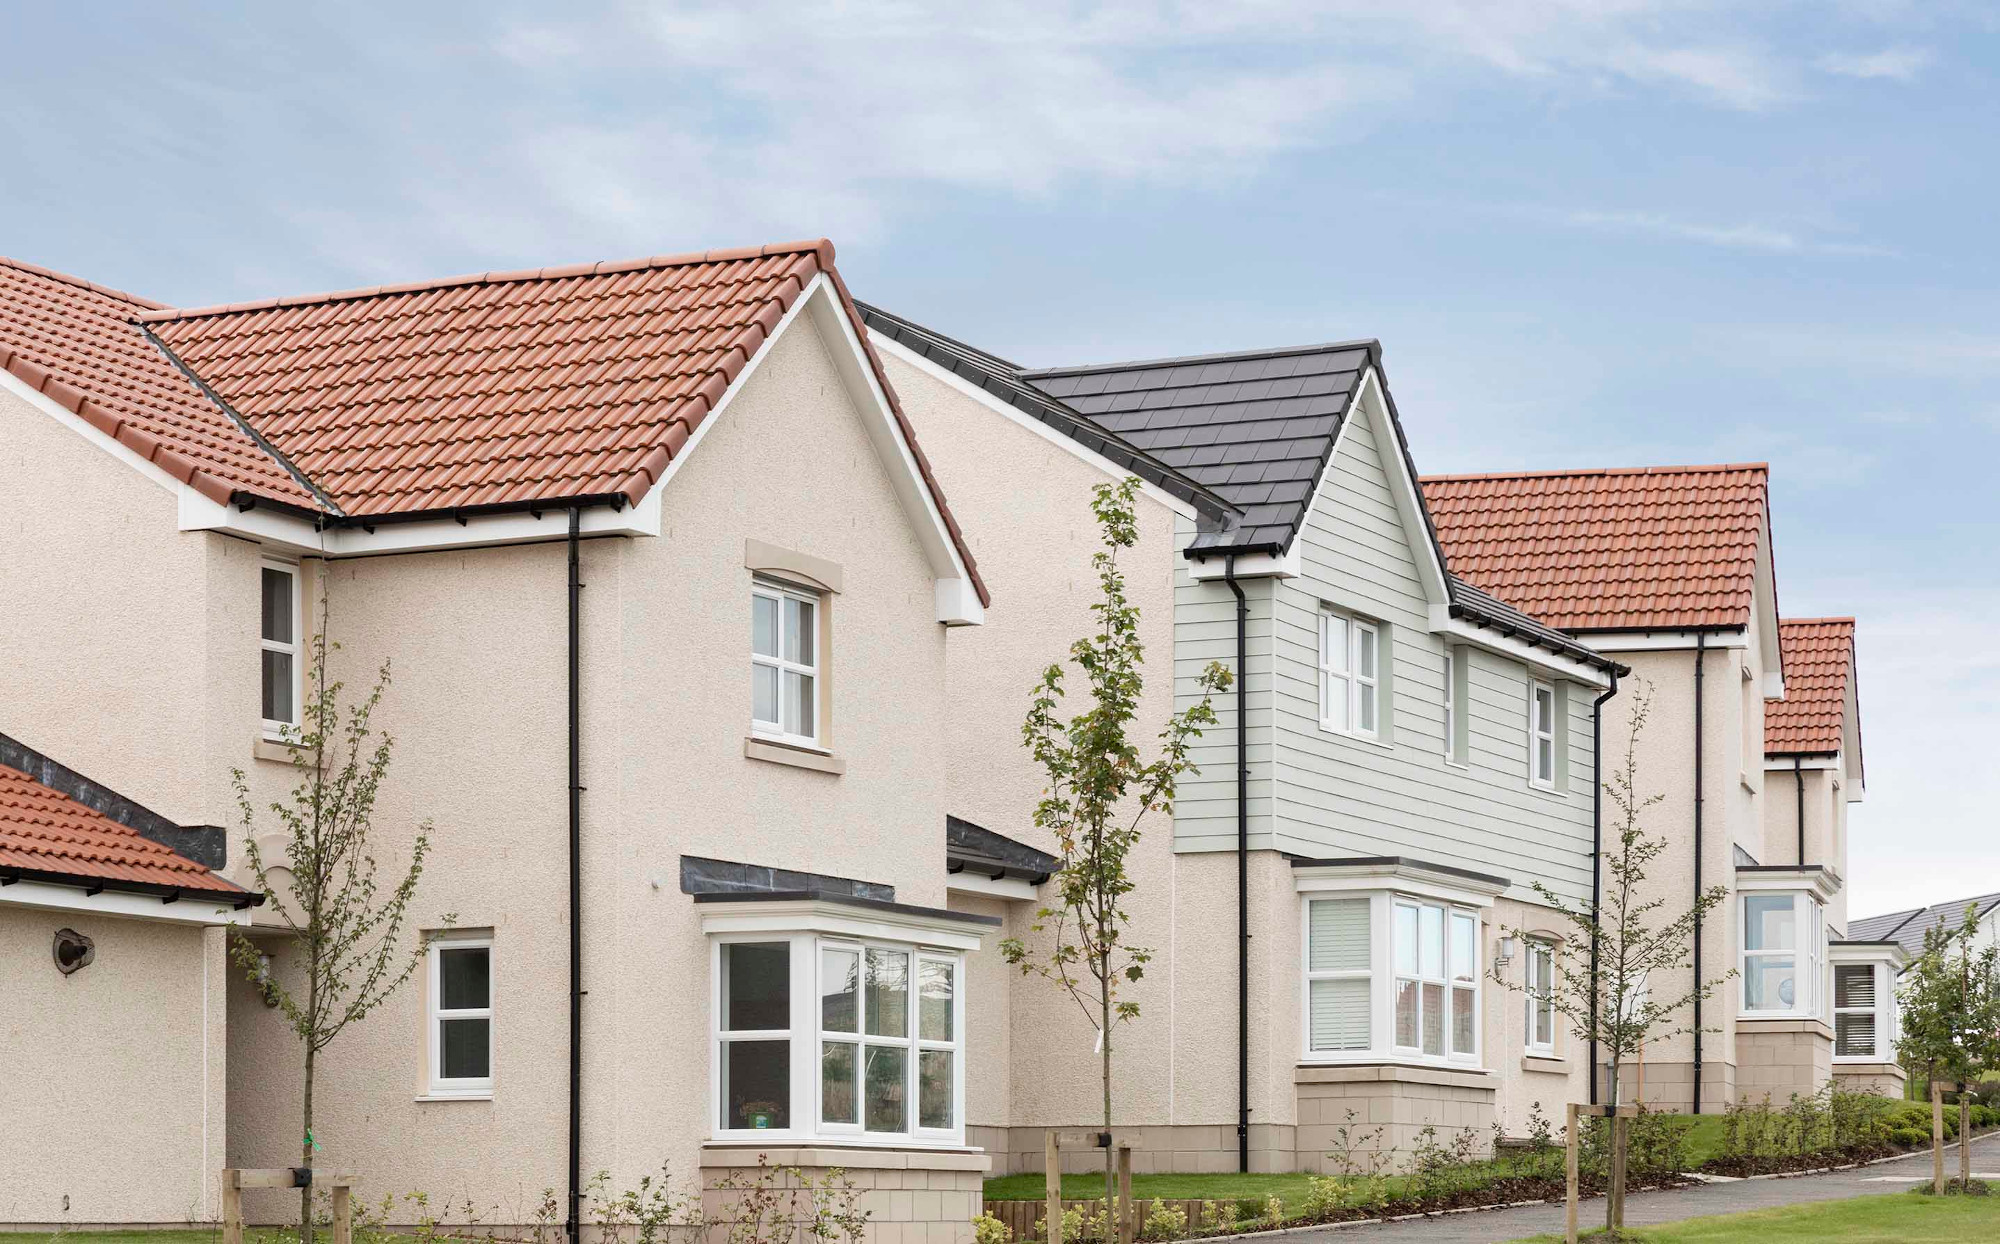 Proposals by Miller Homes for Kinross set to go out for consultation